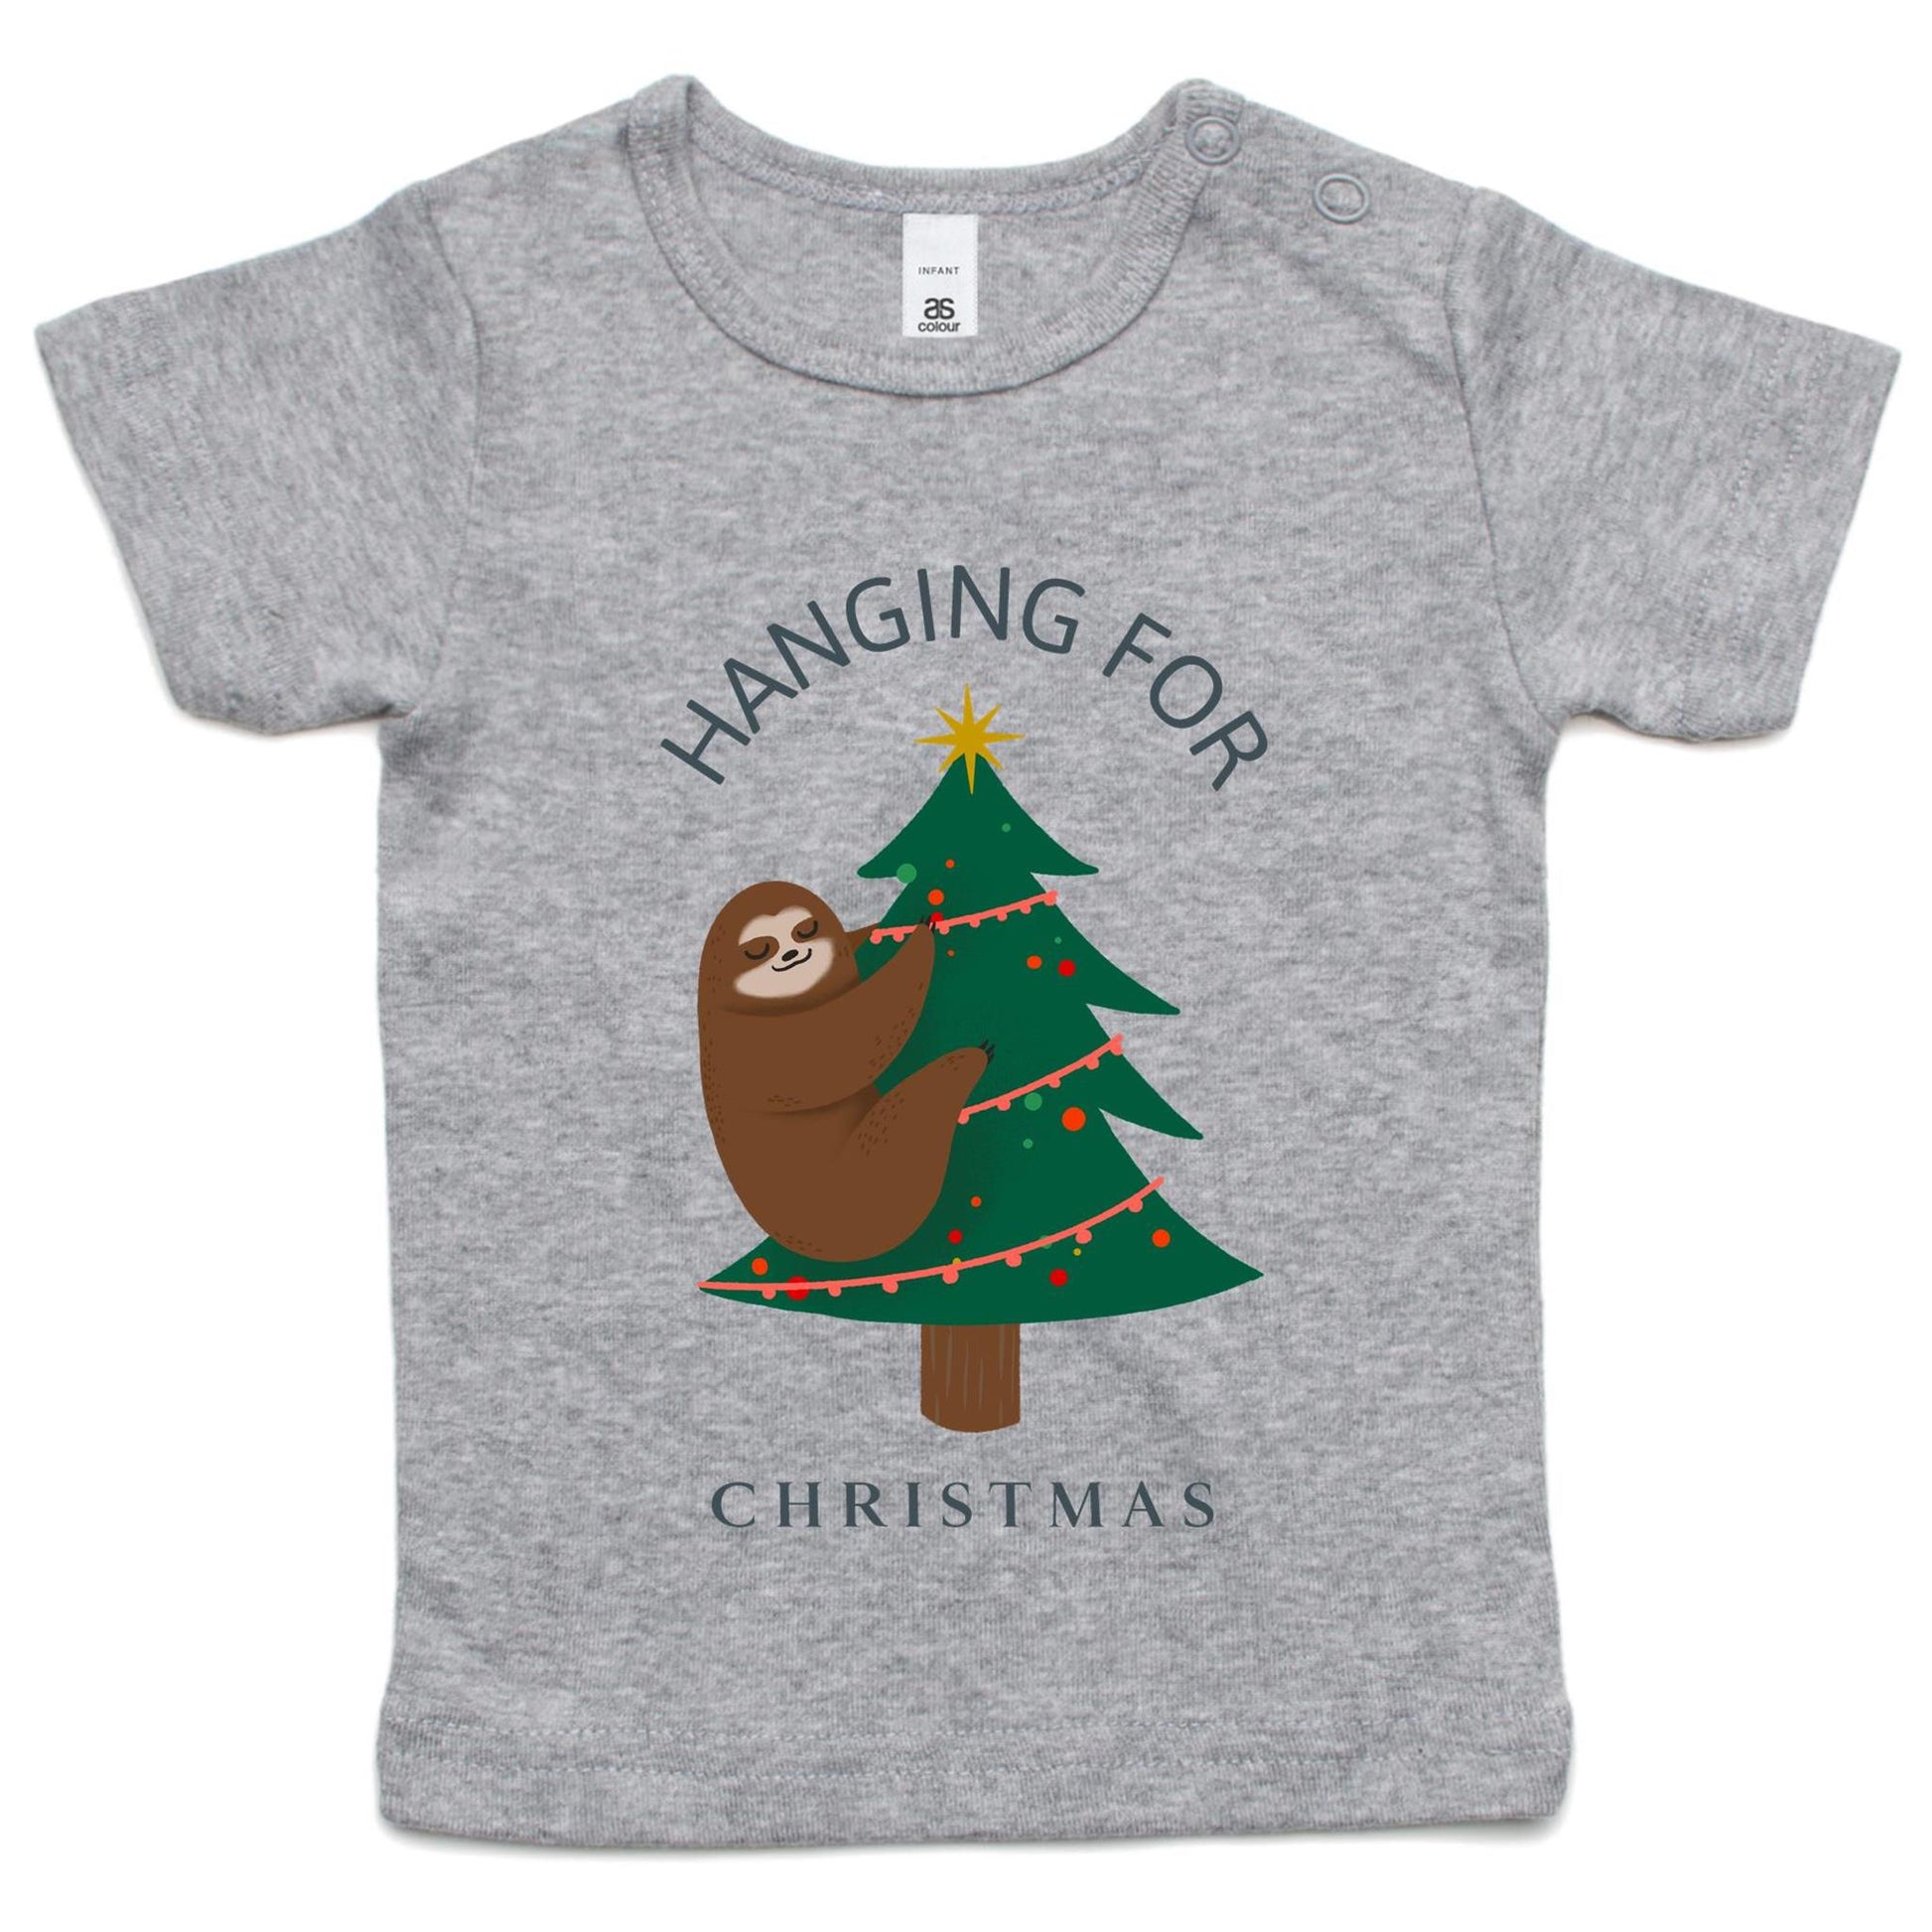 Hanging For Christmas - Baby T-shirt Grey Marle Christmas Baby T-shirt Merry Christmas